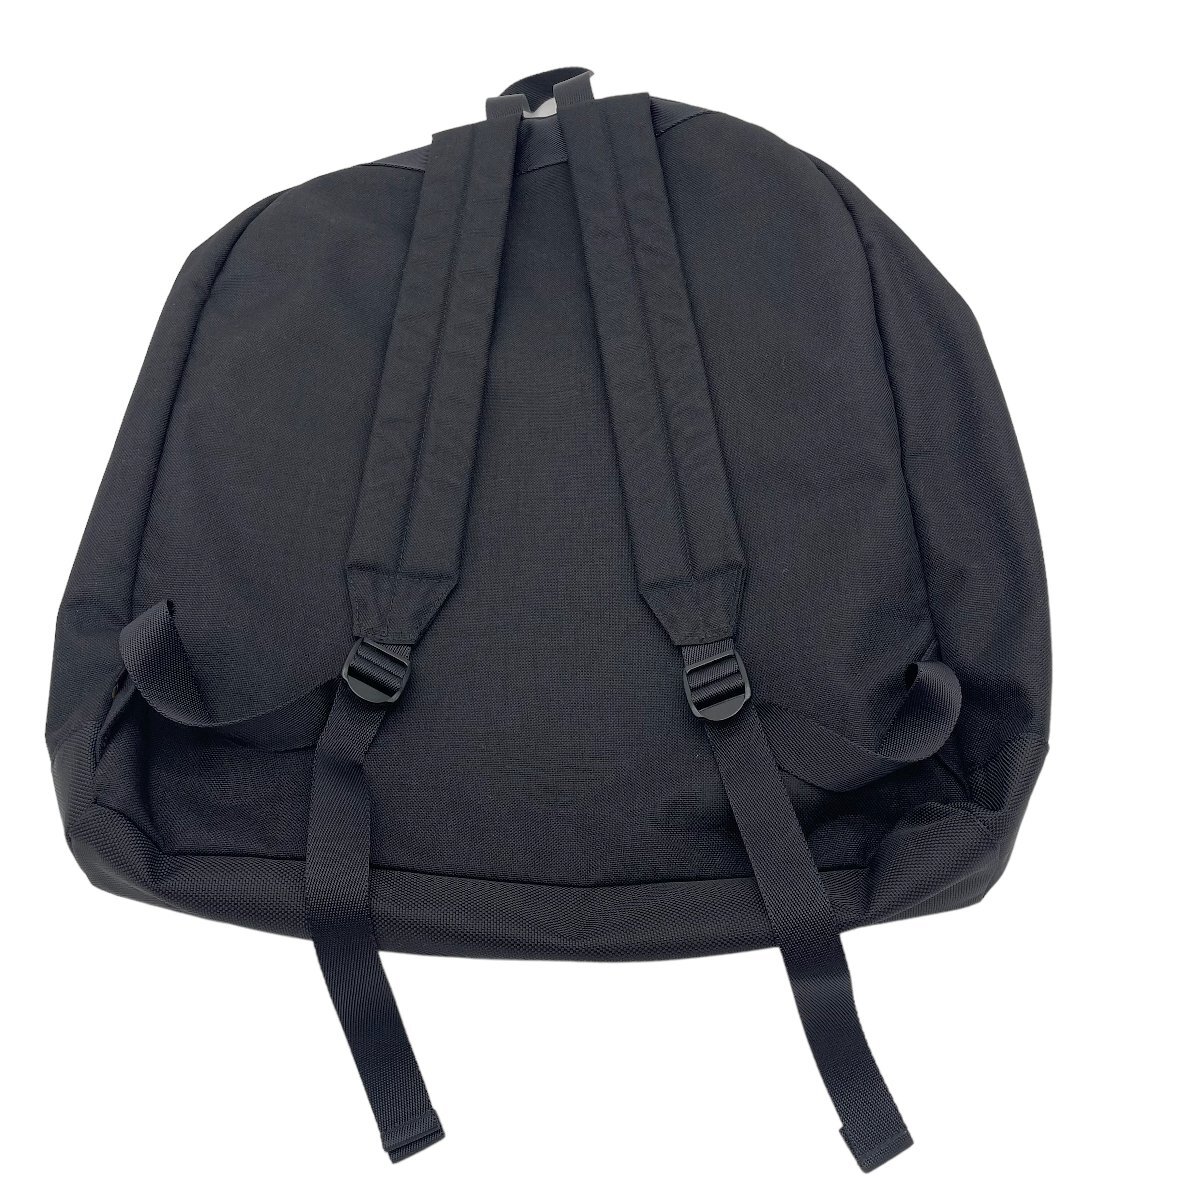 A807●美品●UNION ×OUTDOOR PRODUCTS　ユニオン×アウトドアプロダクツ●Large PALS Backpack　リュック　バックパック●ブラック_画像3